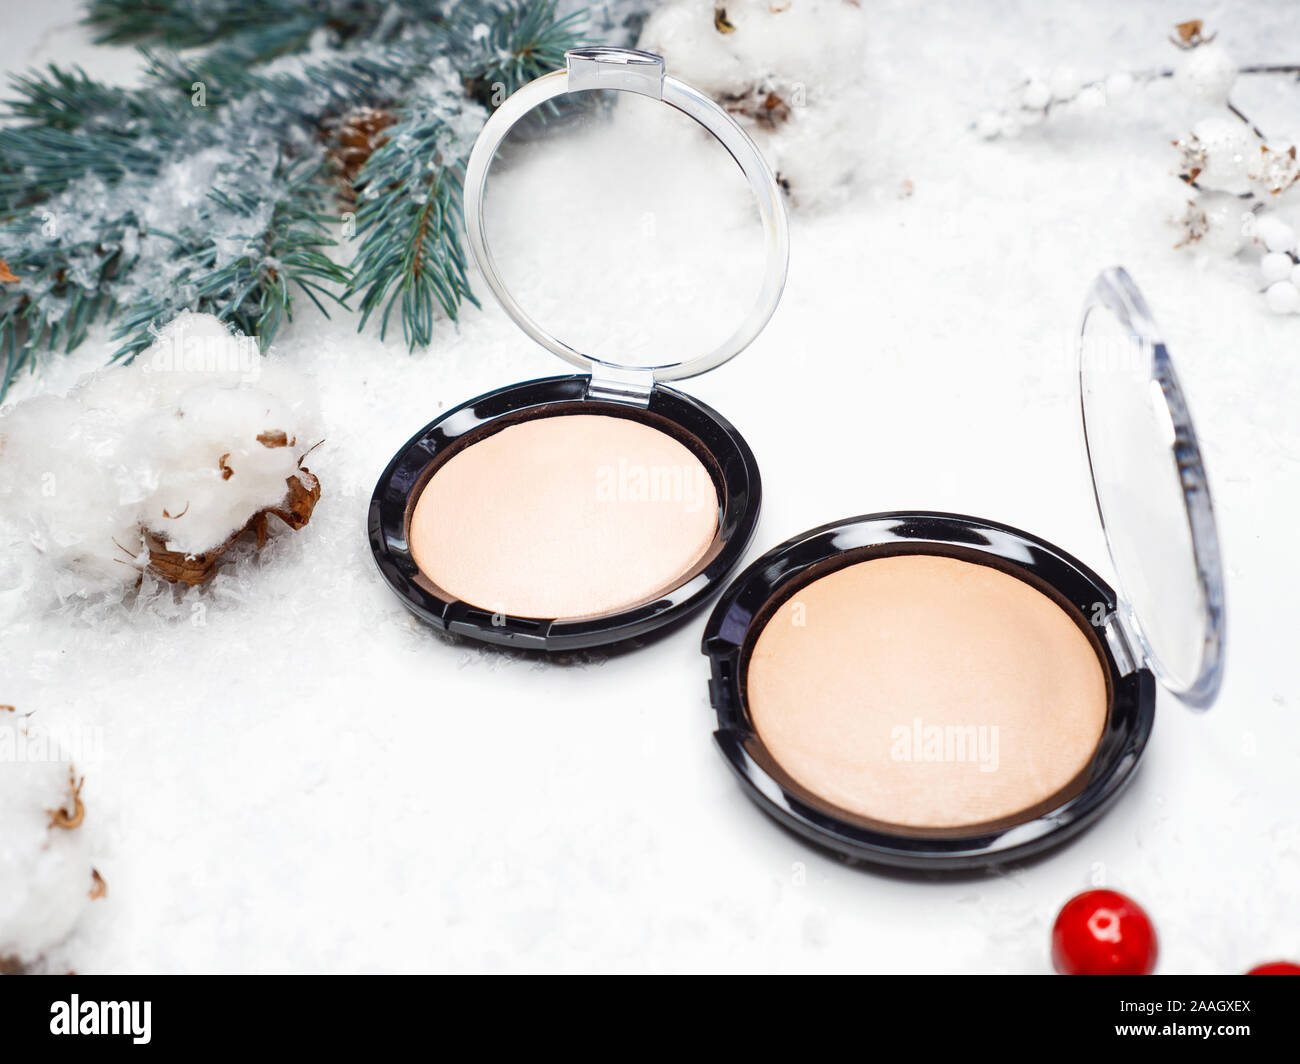 Christmas makeup and skin care. Winter makeup, new cosmetics, products for beauty and festive image. Powder, highlighter or Foundation. Stock Photo